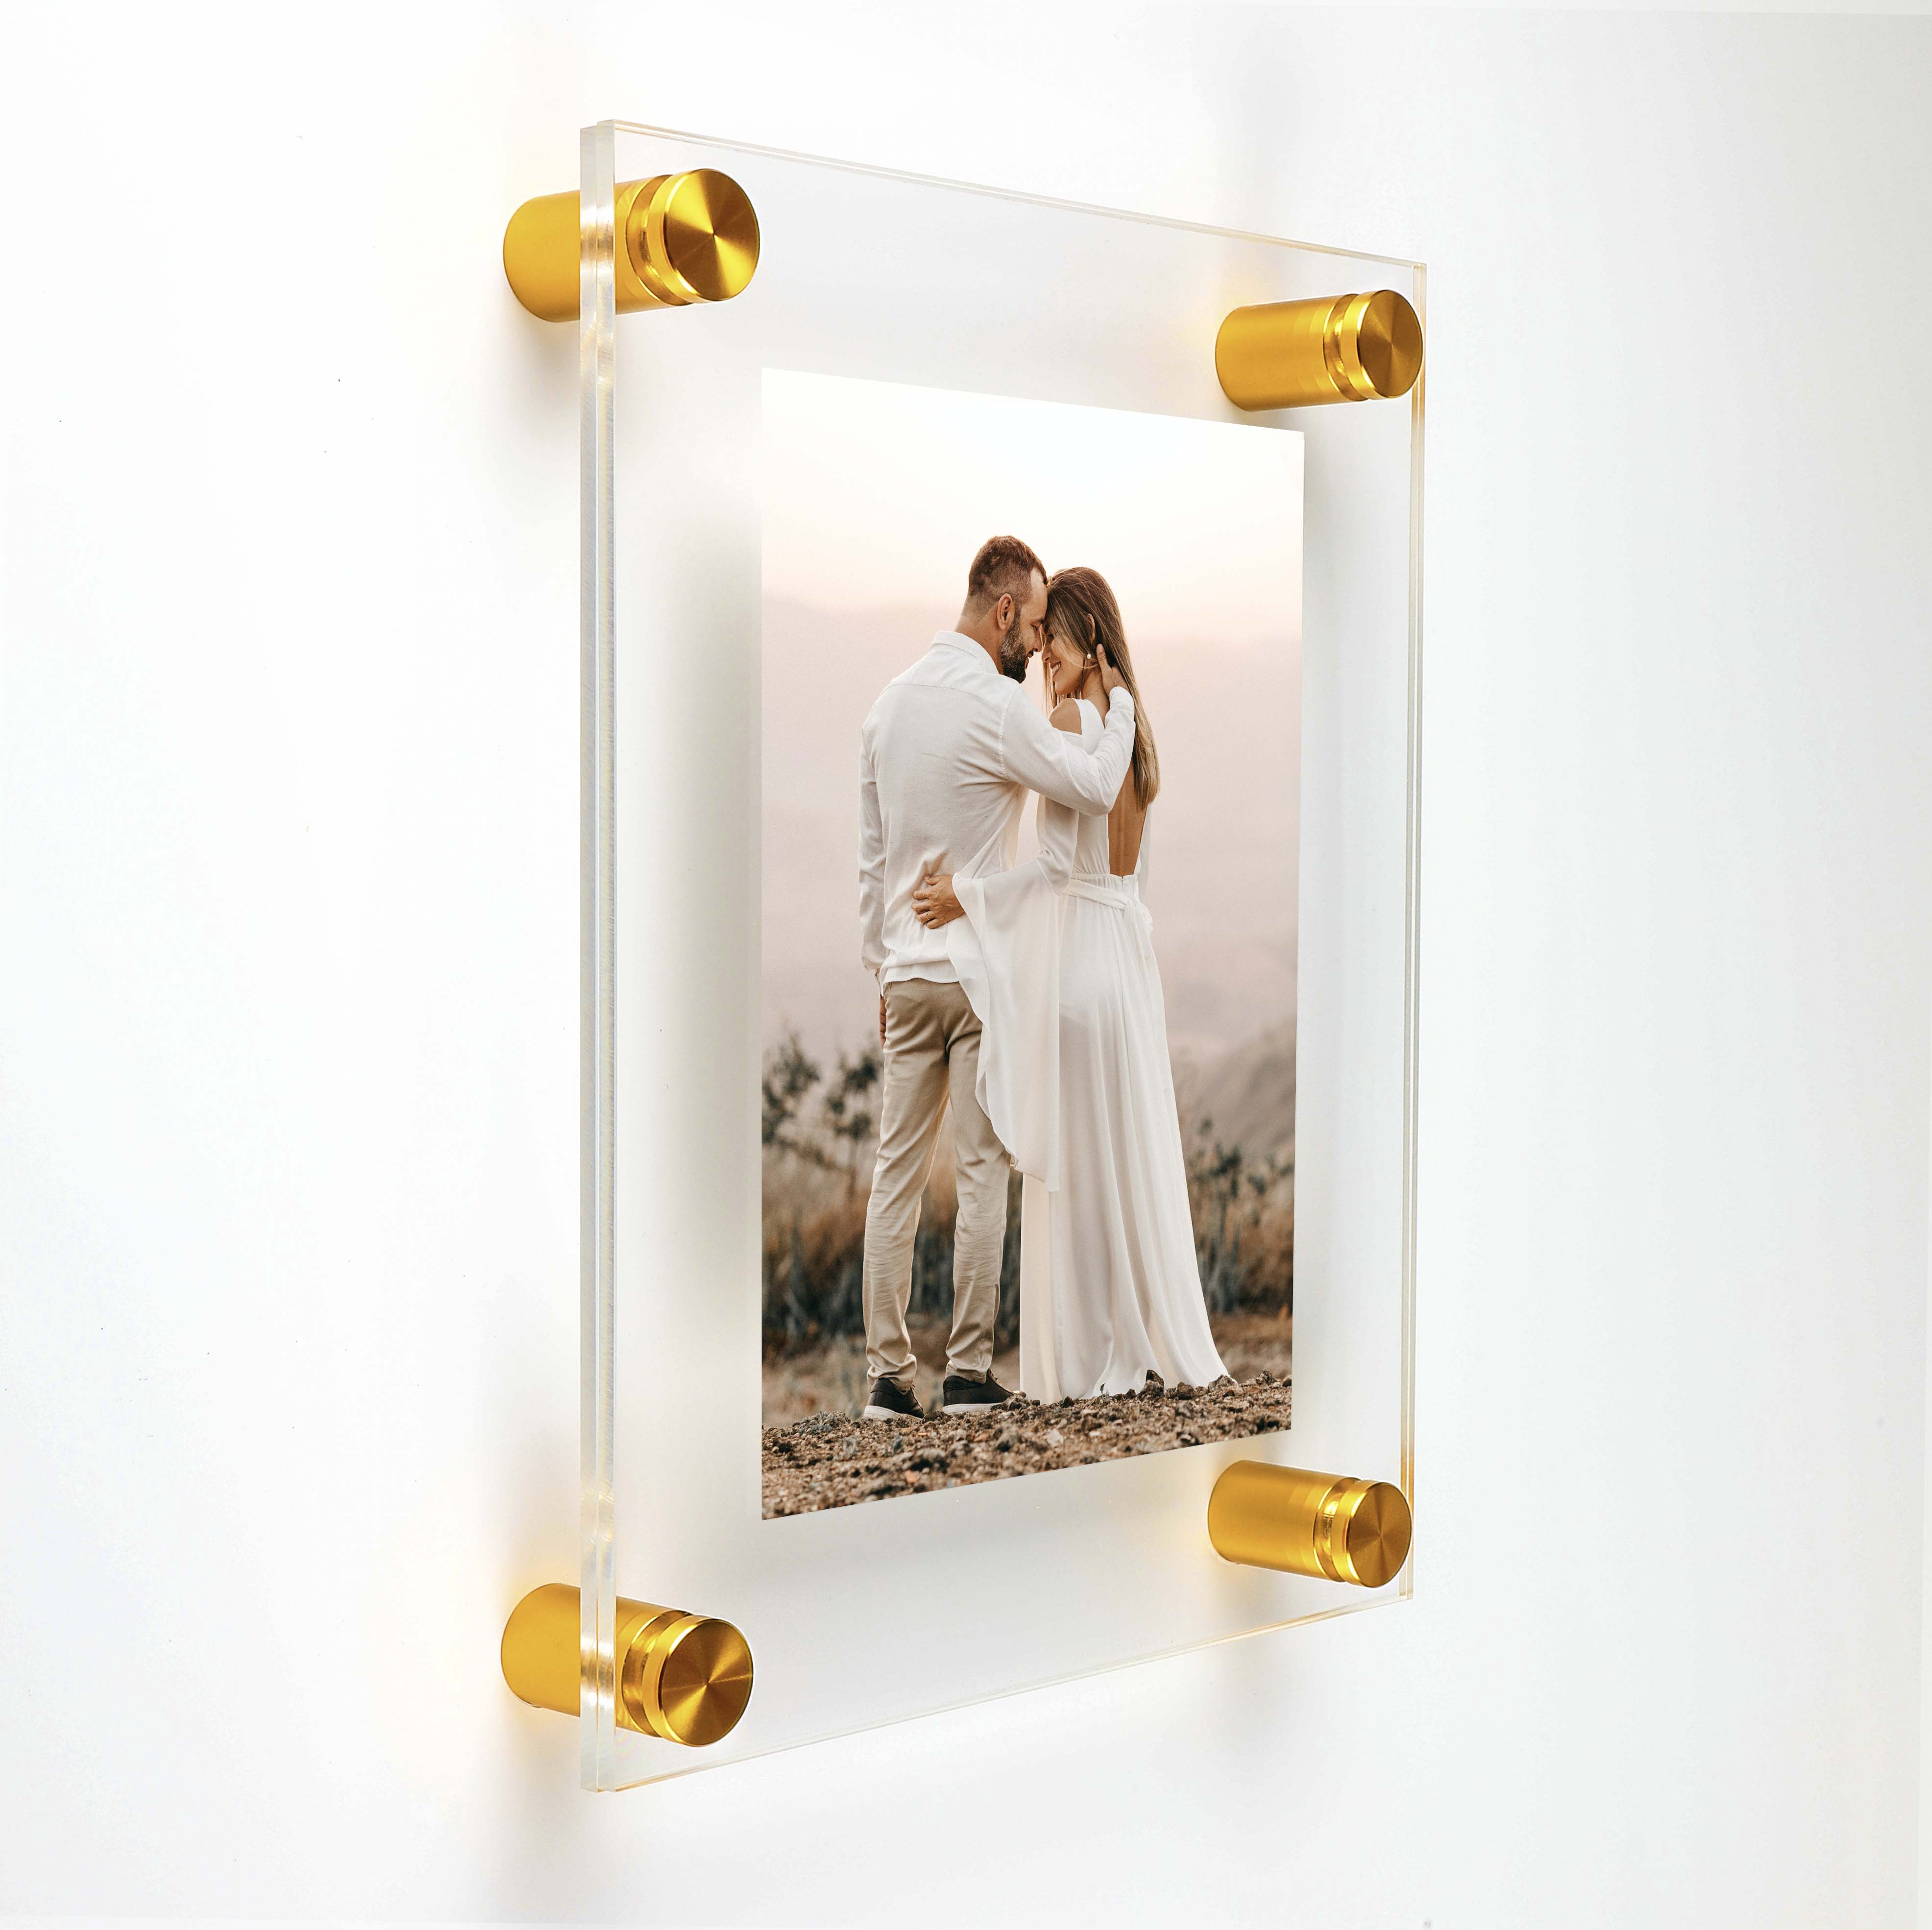 (2) 13-1/2'' x 19-1/2'' Clear Acrylics , Pre-Drilled With Polished Edges (Thick 3/16'' each), Wall Frame with (4) 5/8'' x 1'' Gold Anodized Aluminum Standoffs includes Screws and Anchors